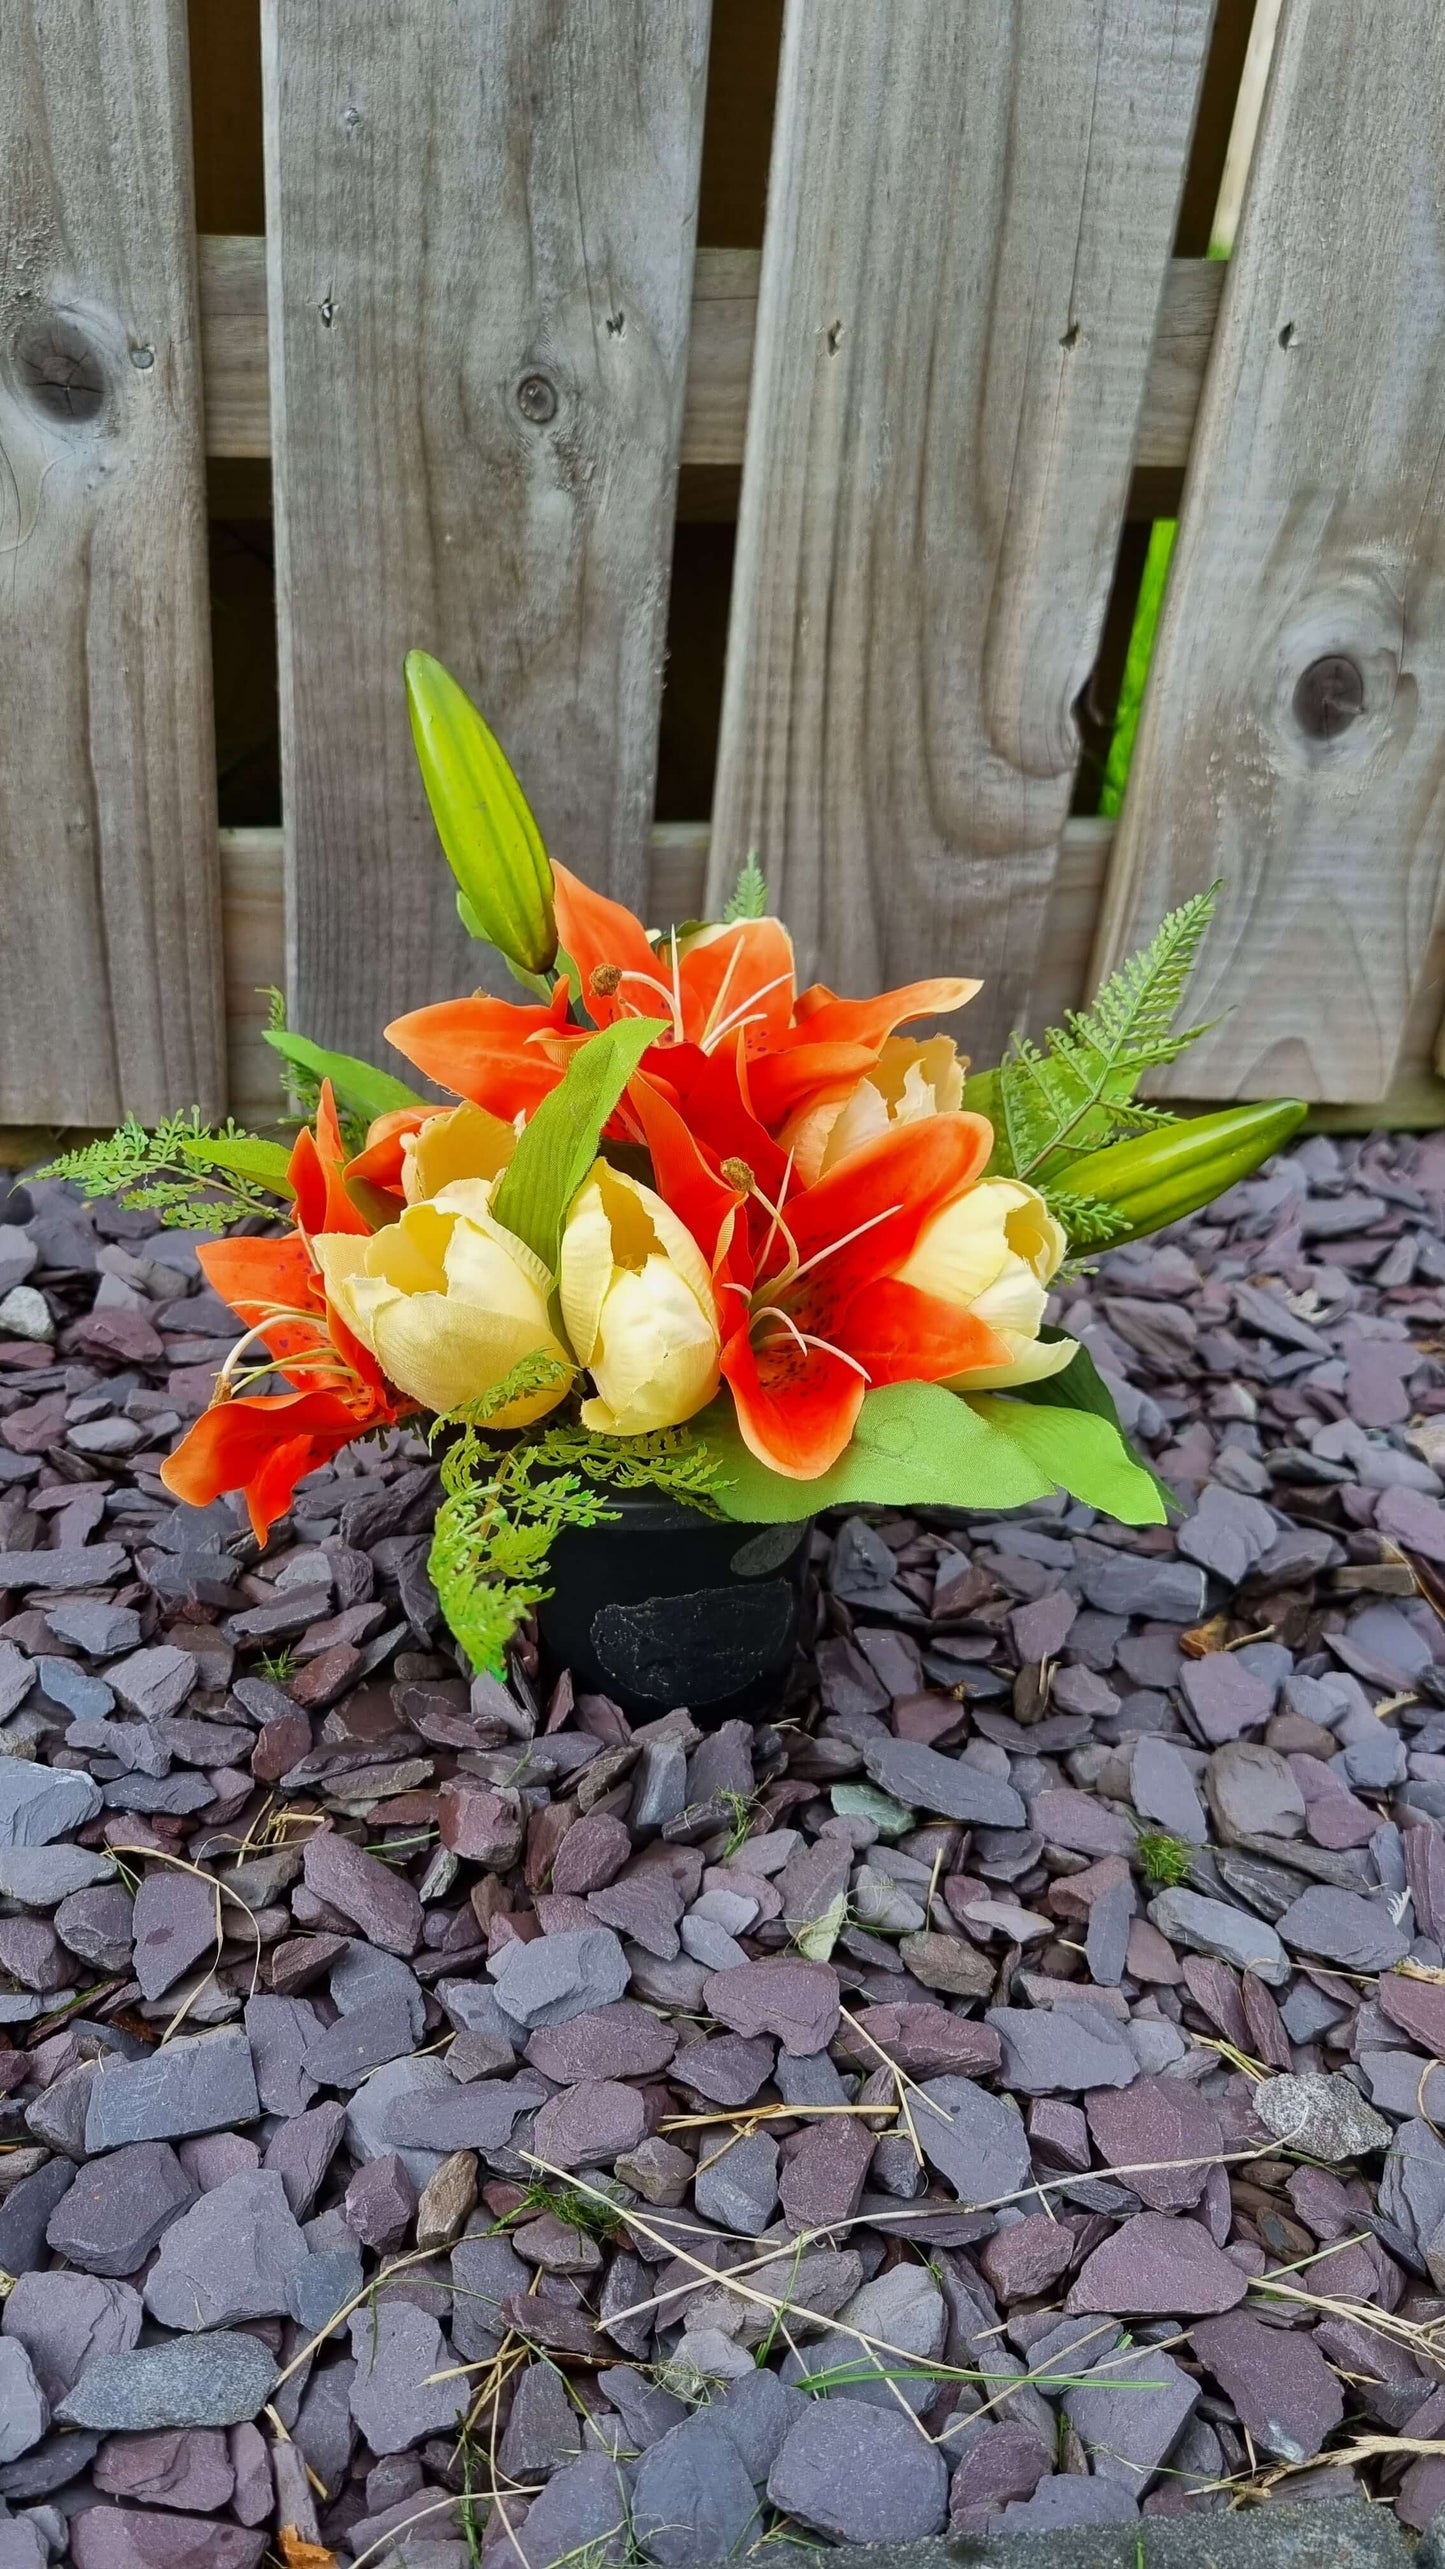 A photo of an orange lily memorial grave pot sitting on top of small purple and grey stones. The grave pot is filled with artificial orange lilies and foliage.